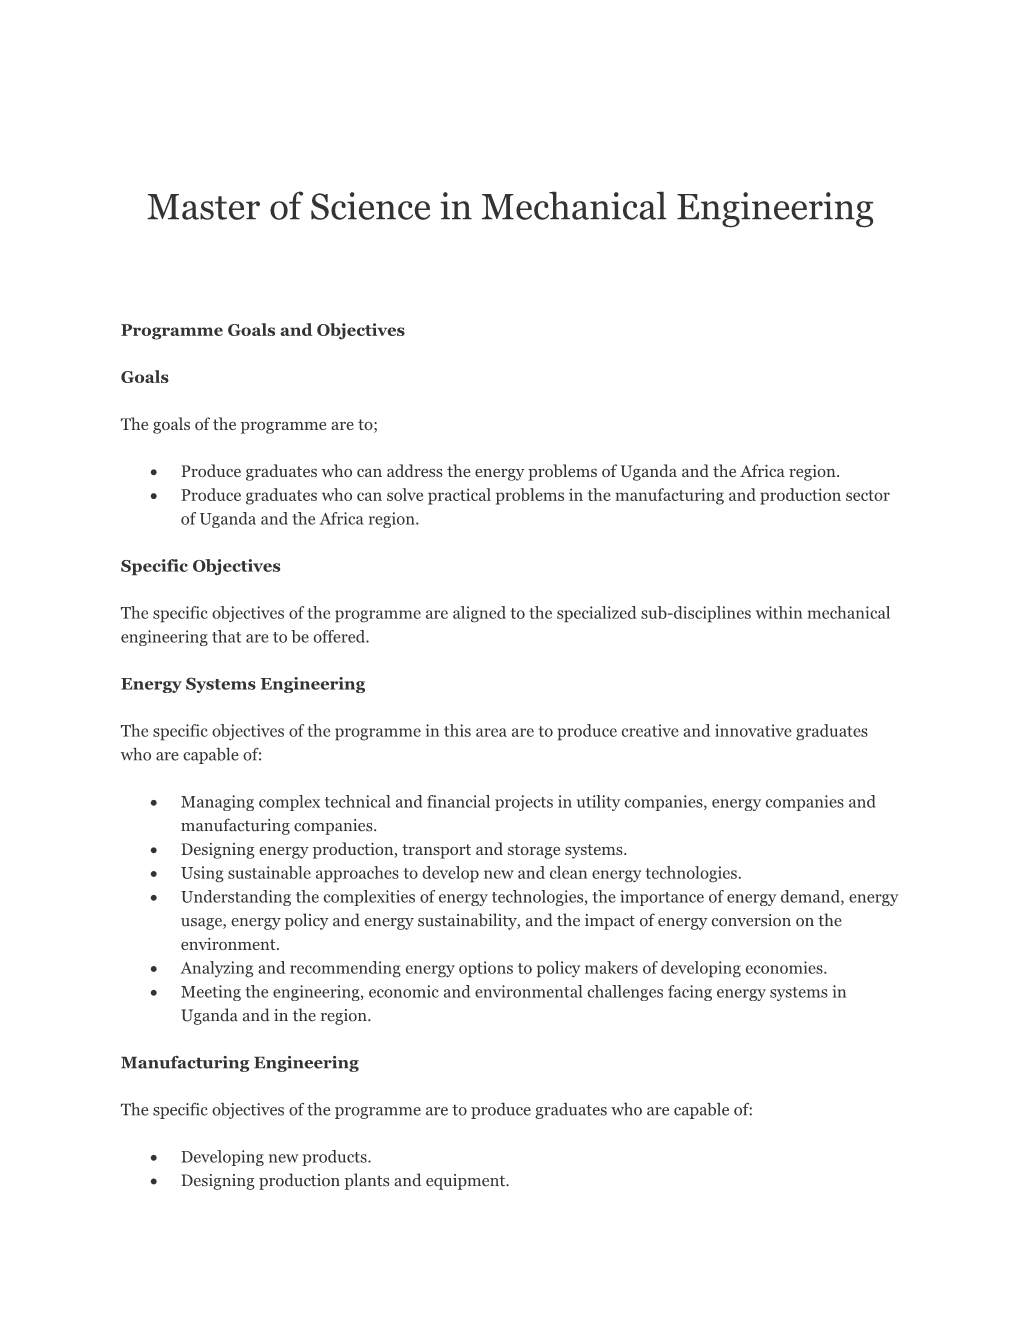 Master of Science in Mechanical Engineering